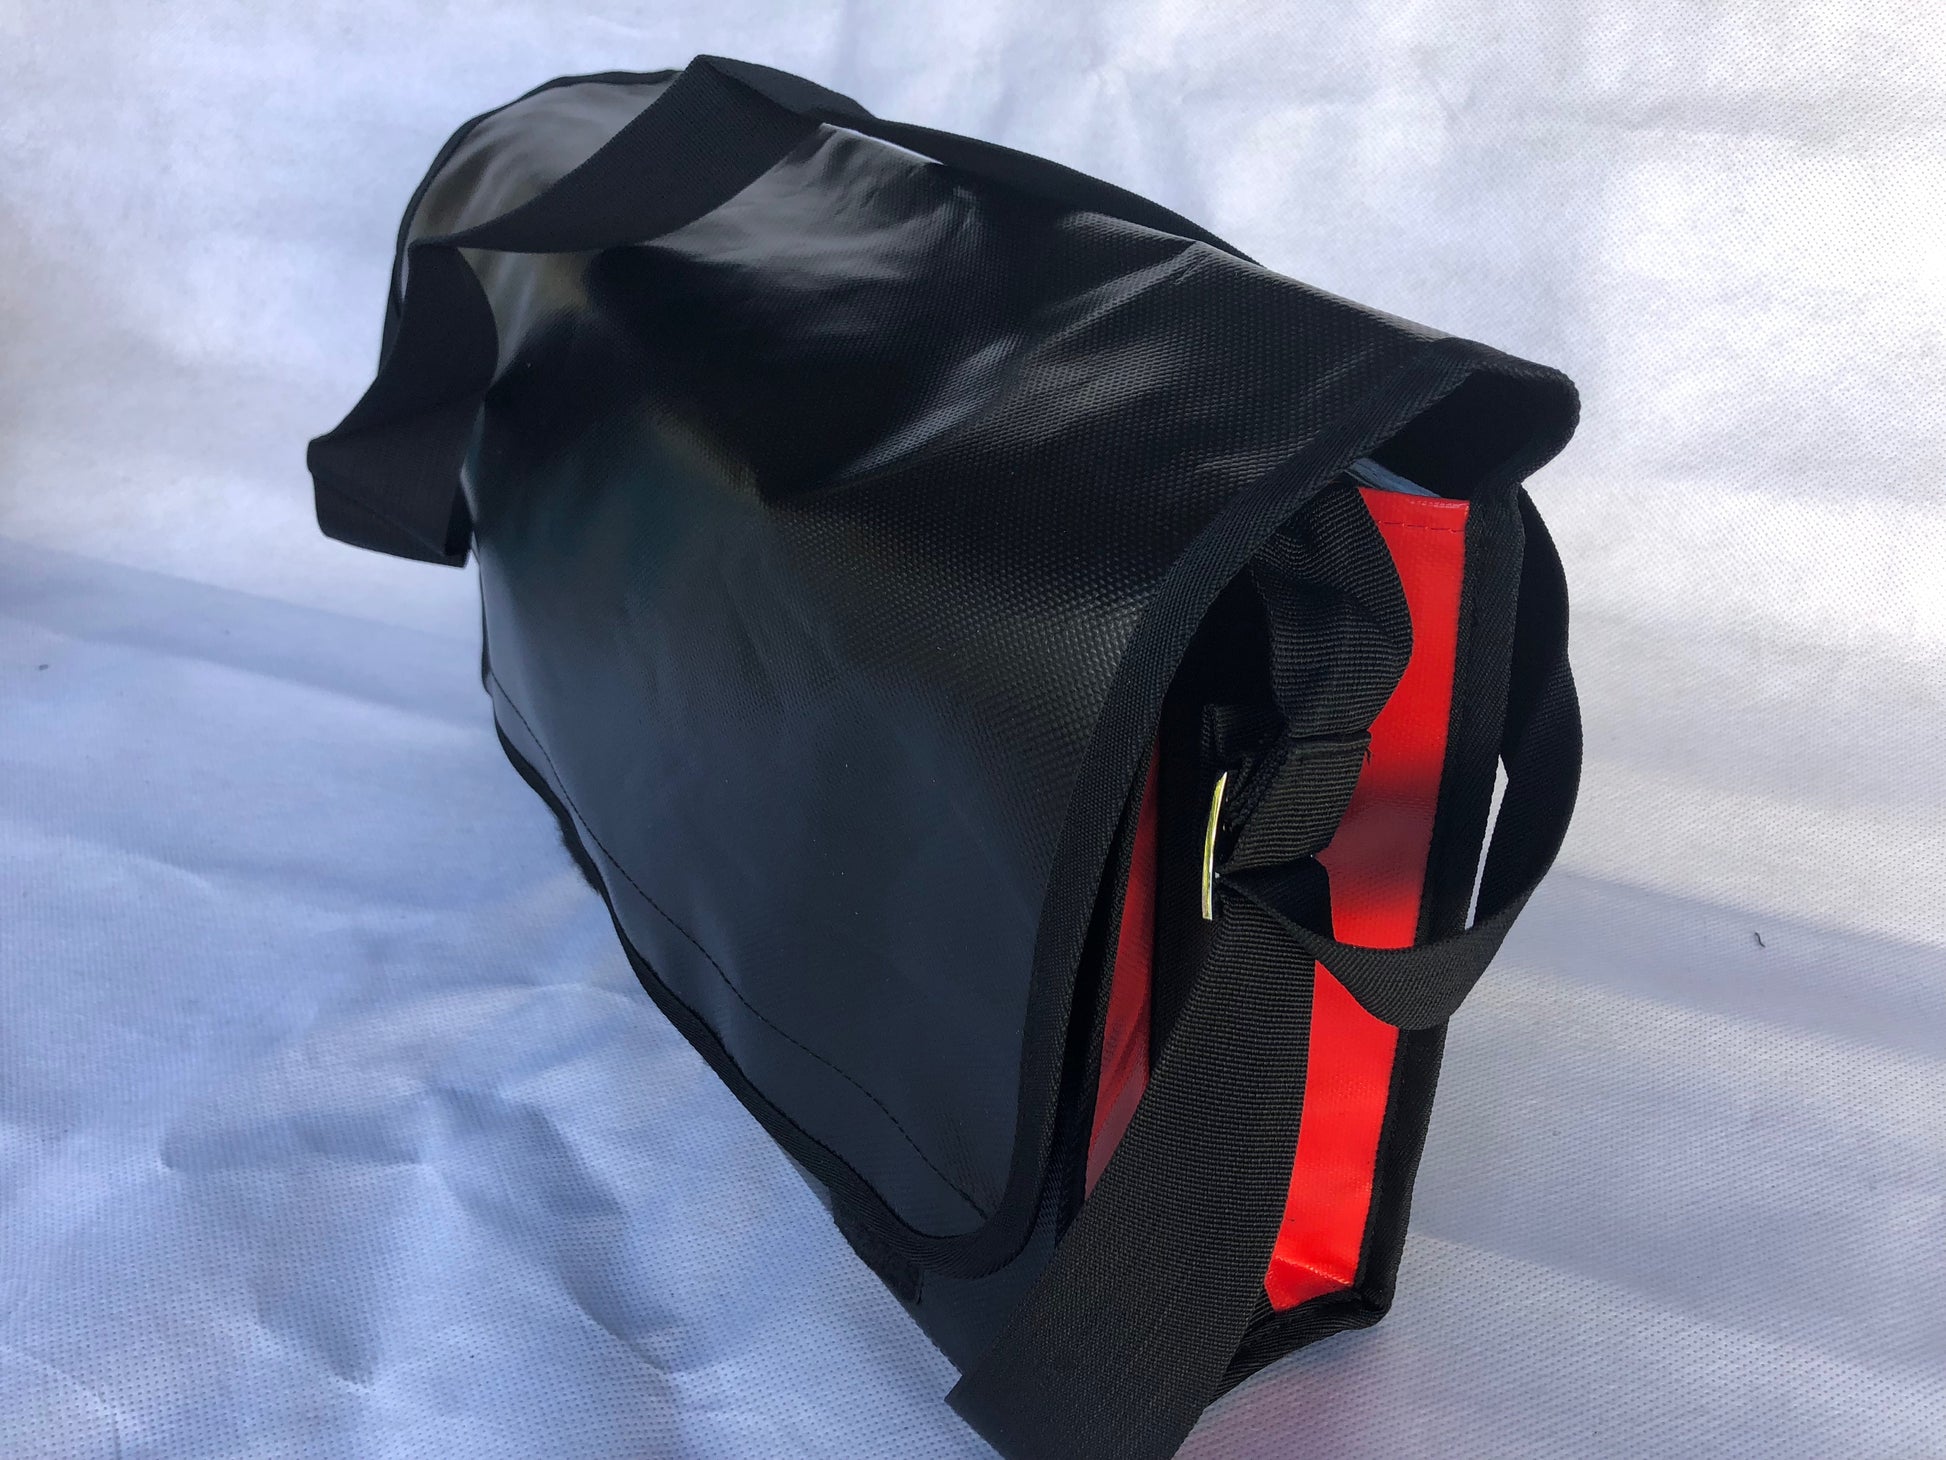 CribBags Small Black and Red Crib bag. Tough Vinyl Construct, Document pocket inside